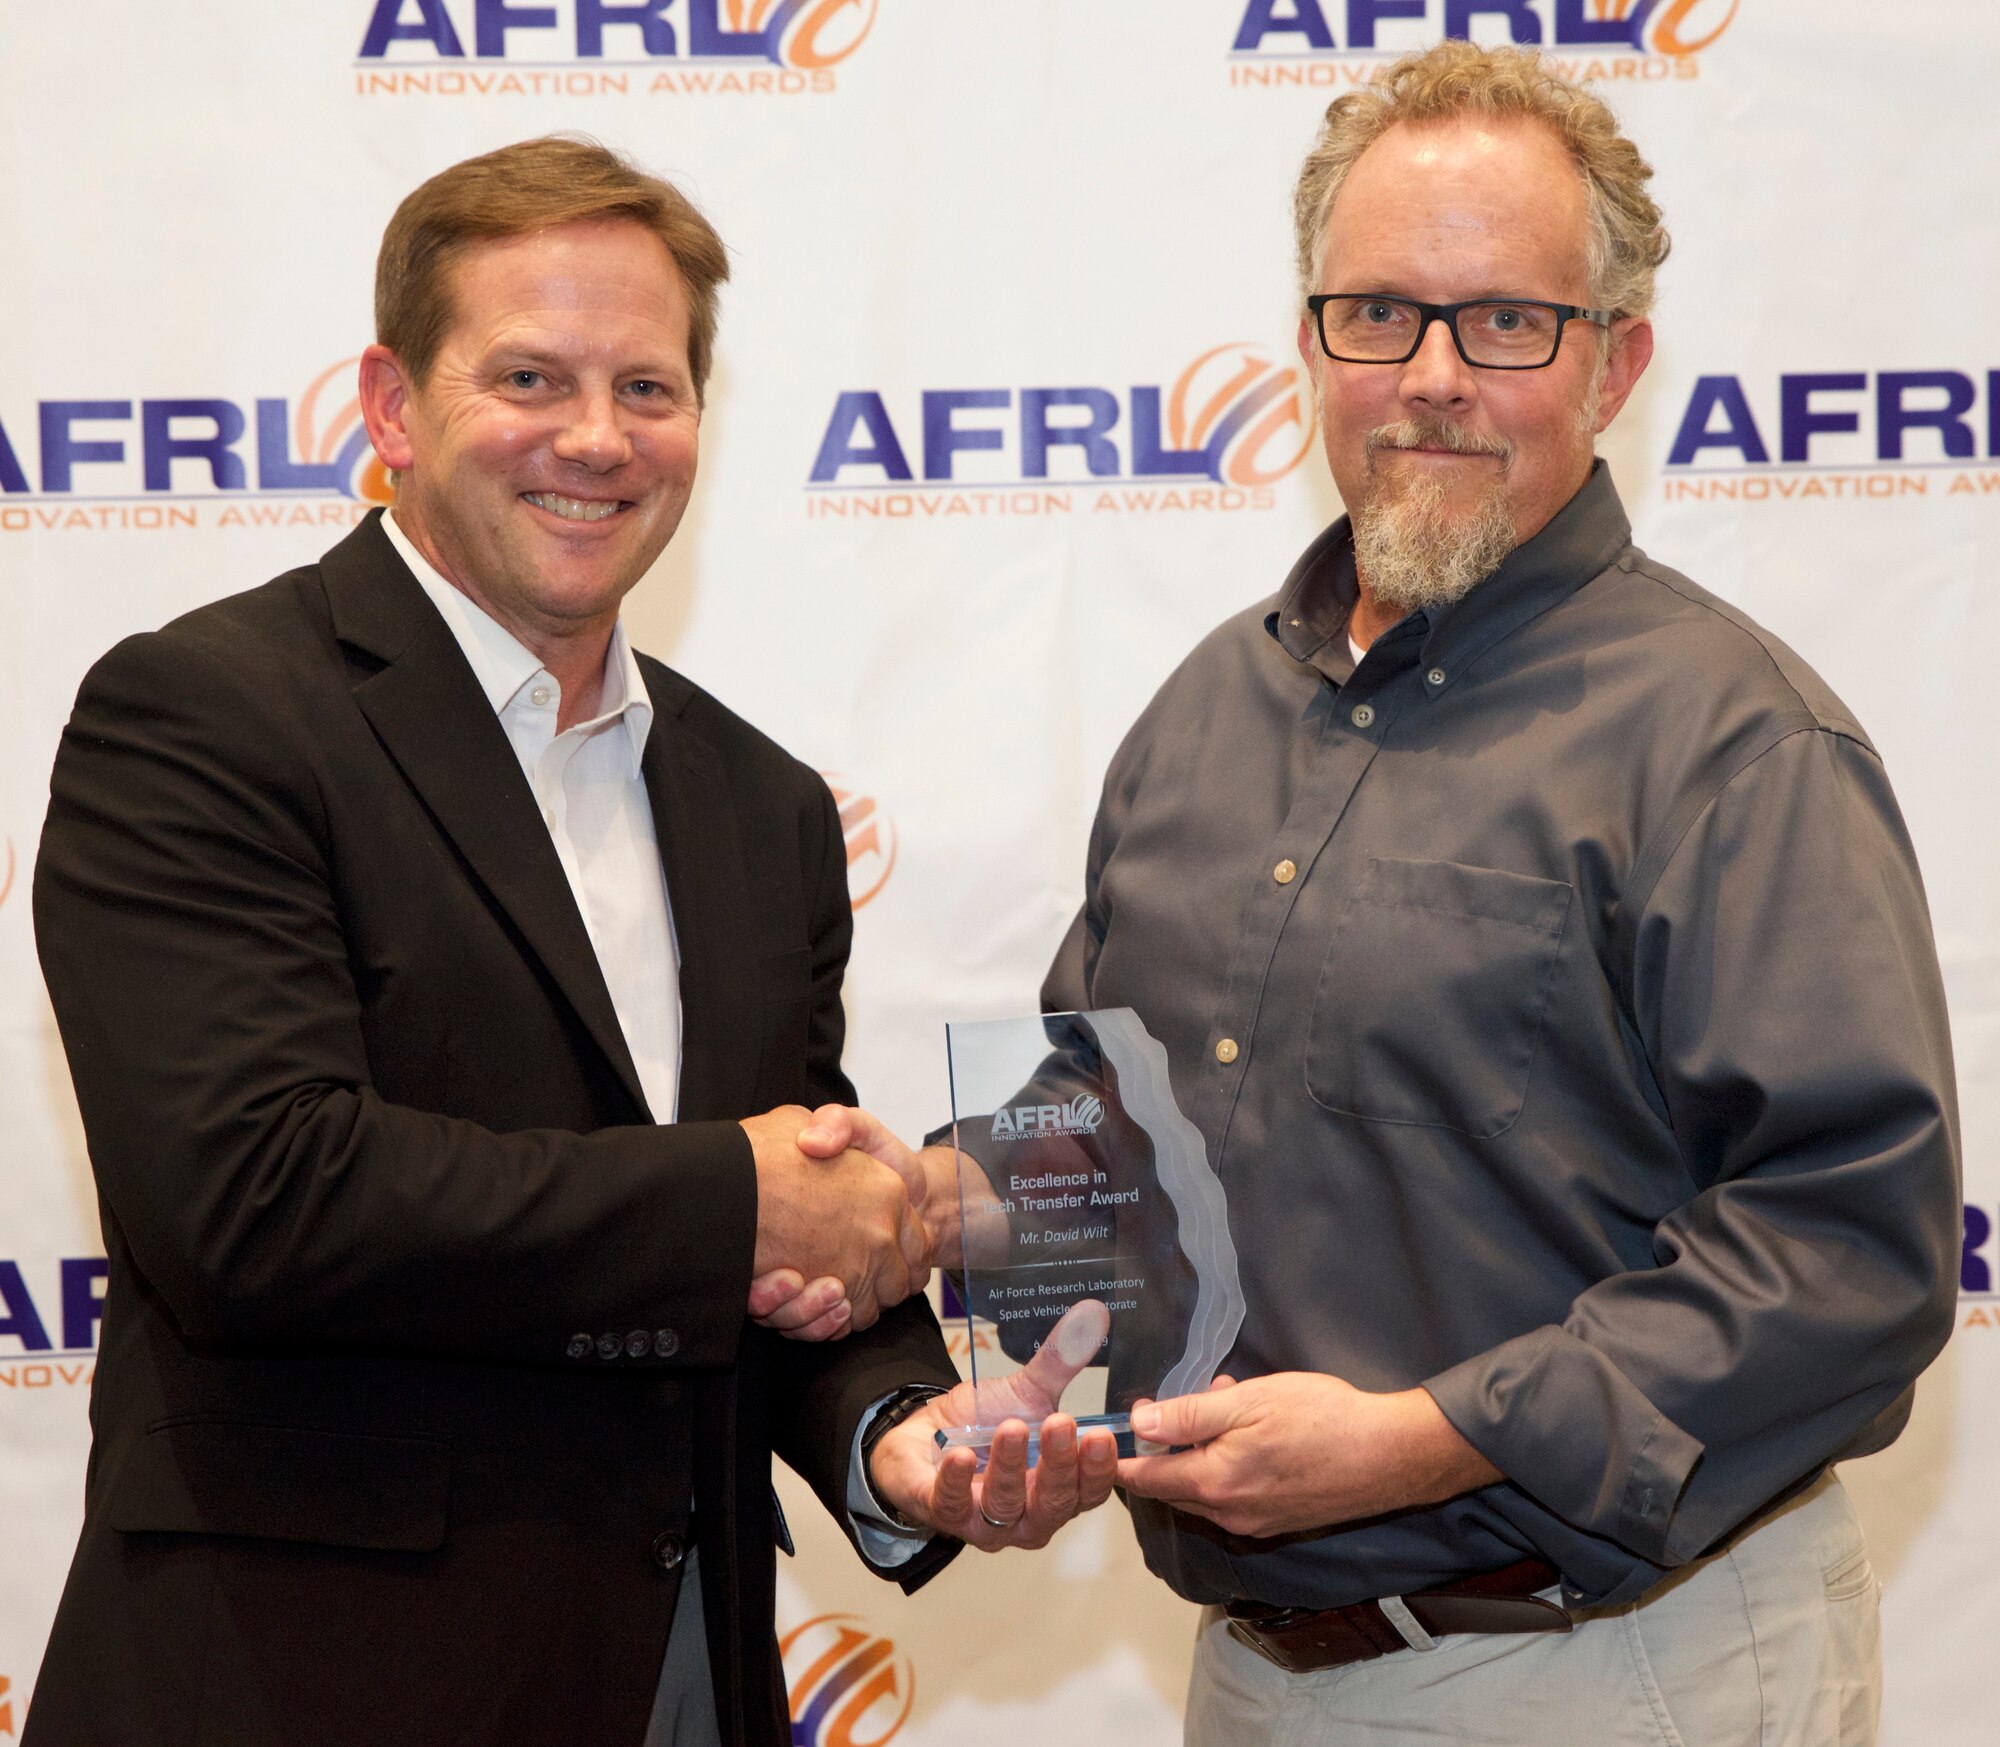 Dr. Kelly Hammett director of the AFRL Directed Energy Directorate presents David Wilt of AFRL’s Space Vehicles Directorate the Excellence in Tech Transfer Award at AFRL New Mexico’s 2019 Innovation Awards event held on Aug. 9 in Albuquerque, N.M.